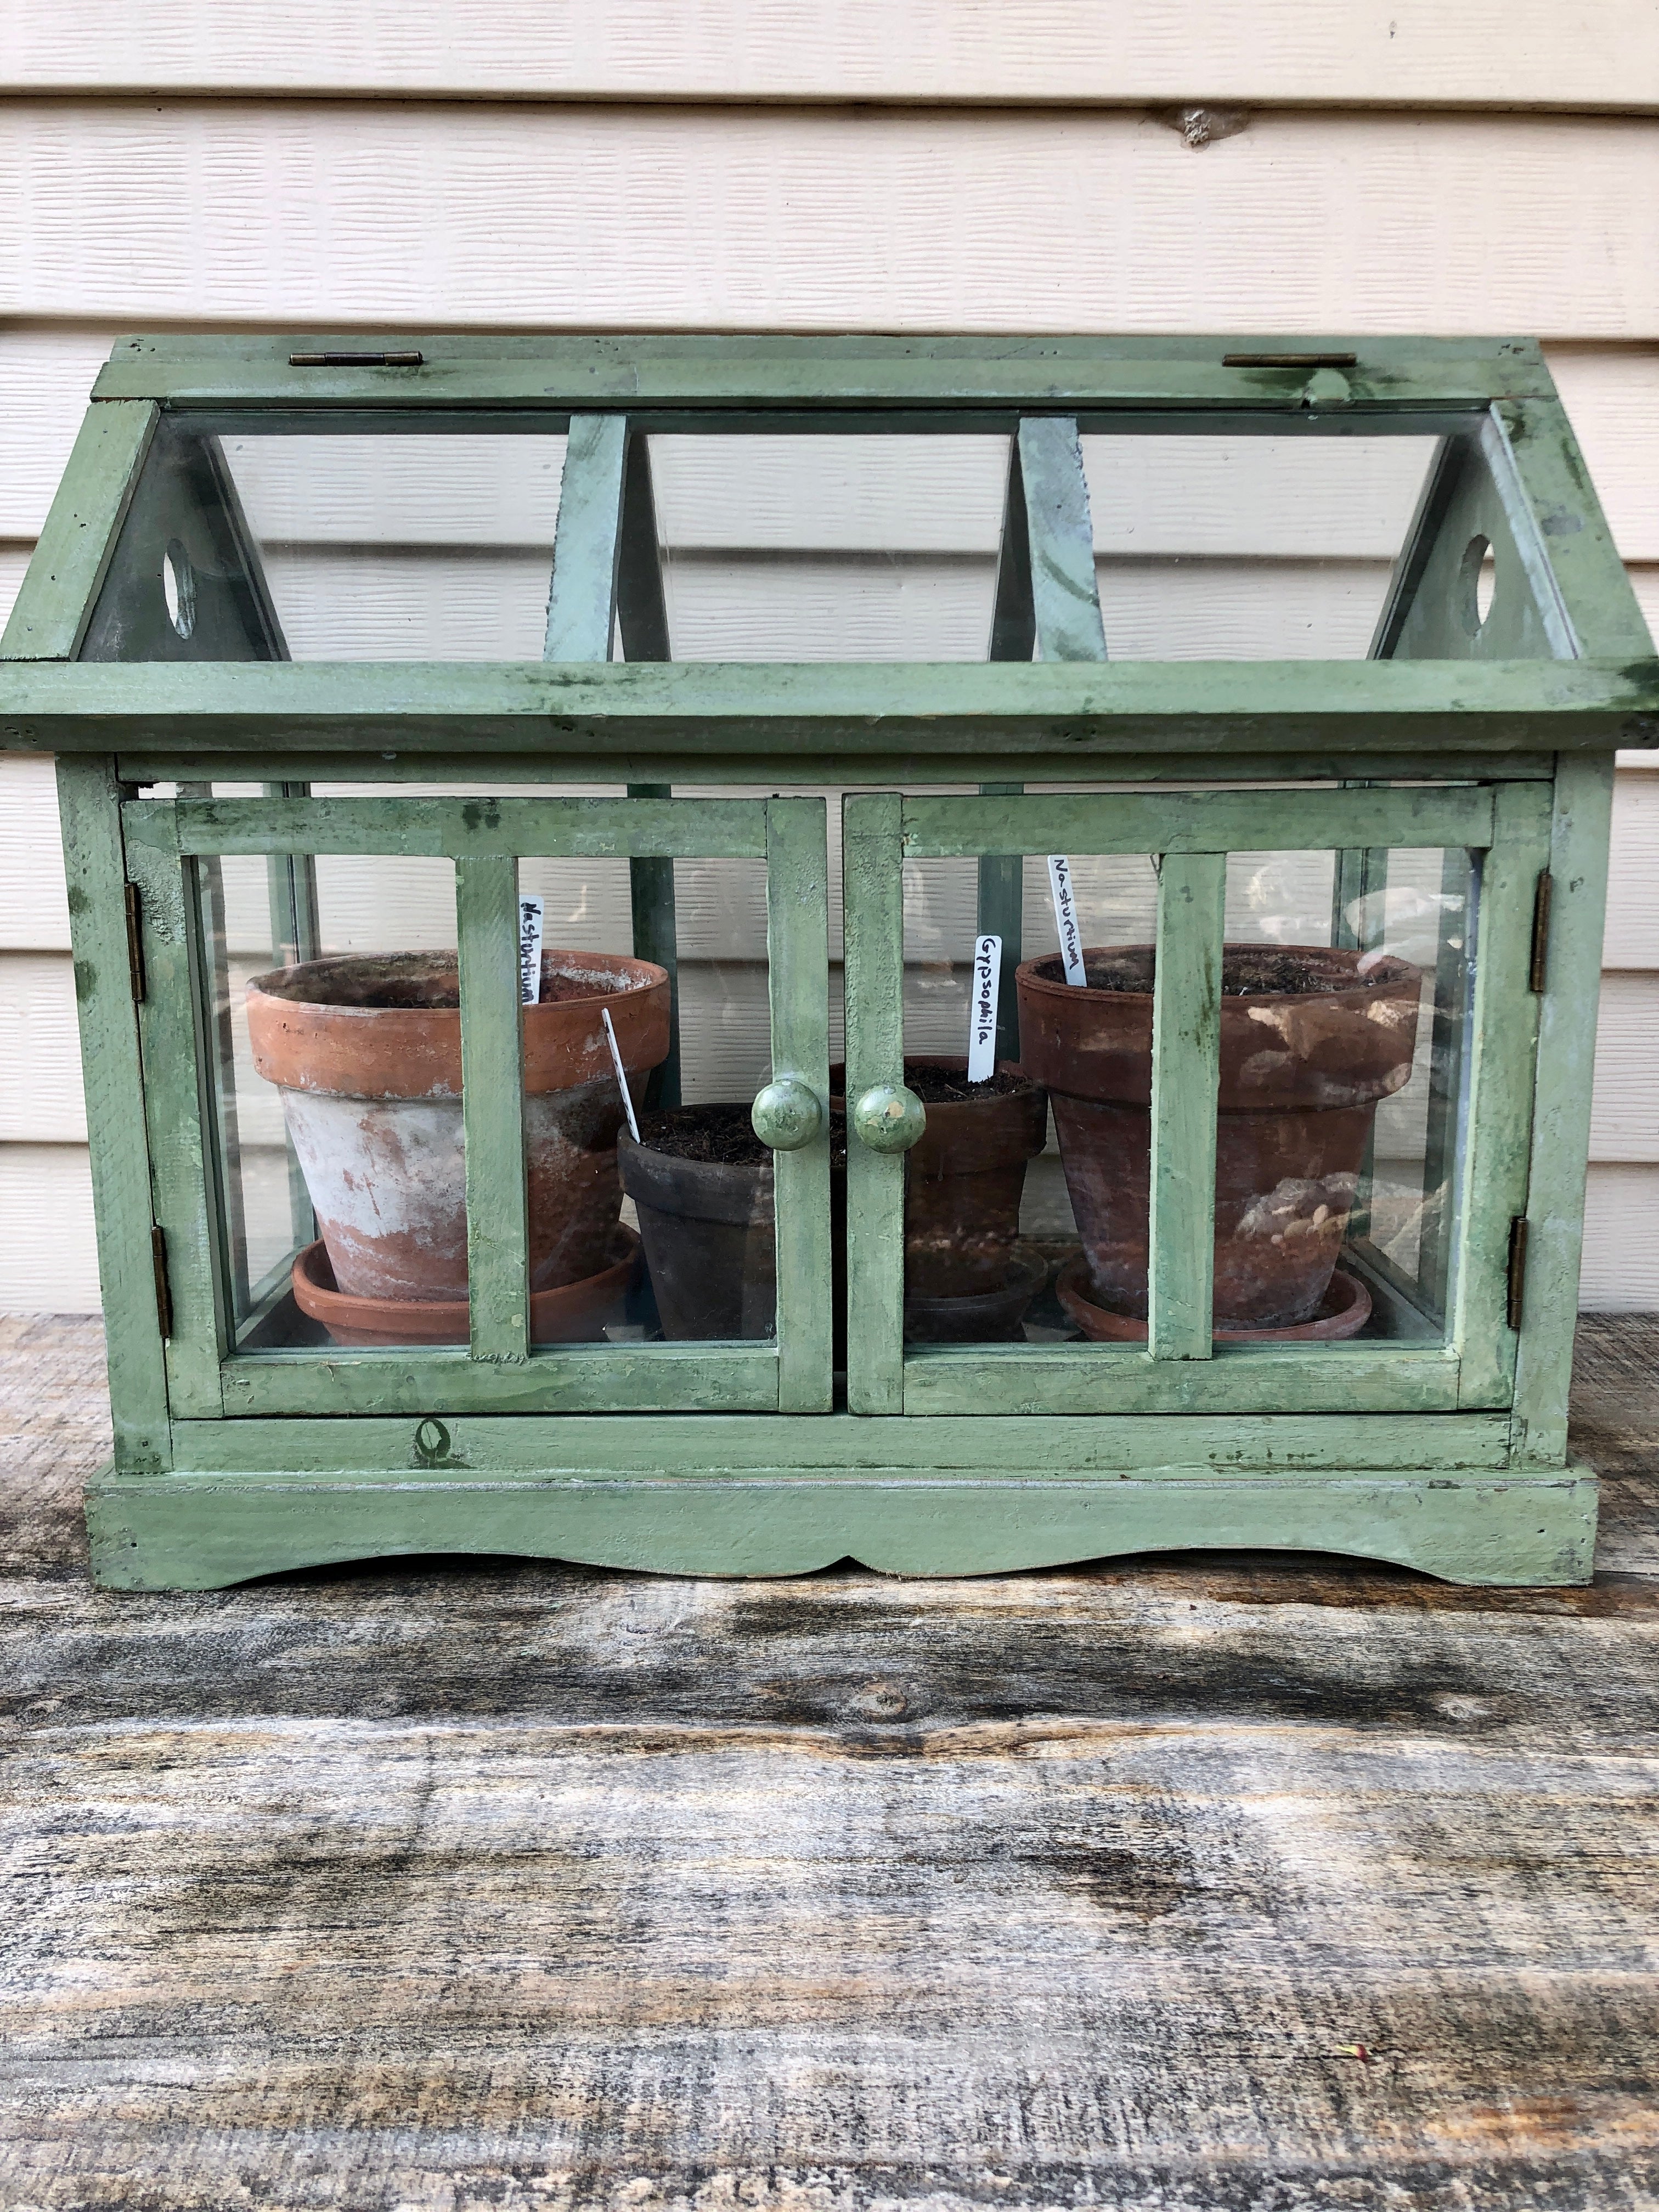 Vintage-Style Greenhouses and Terra Cotta Pots